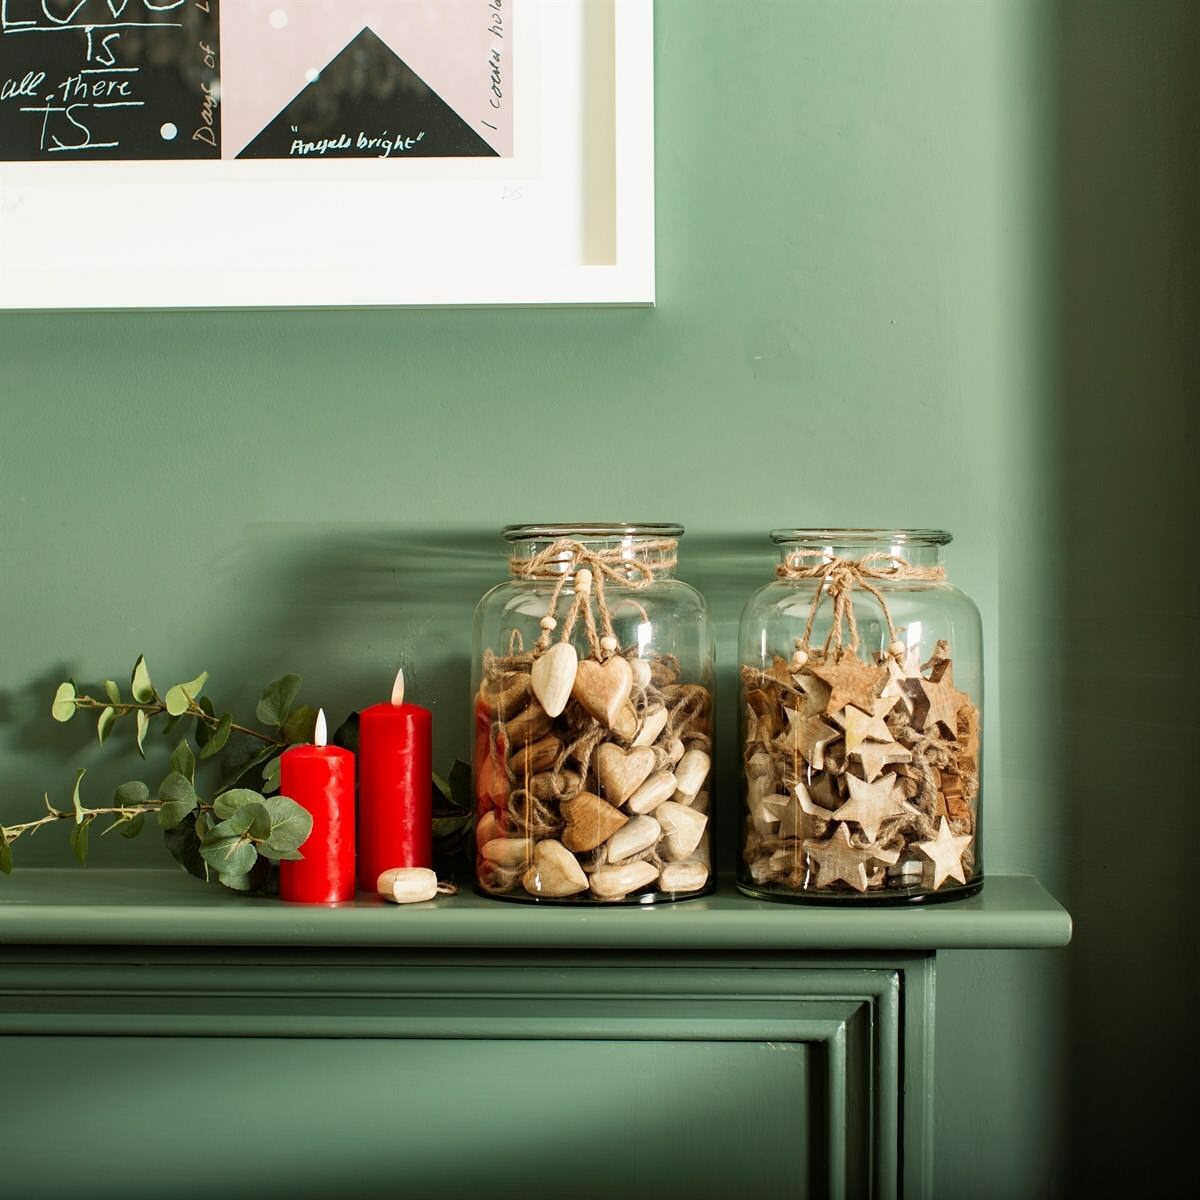 Wooden decorations in two glass jars on a mantelpiece